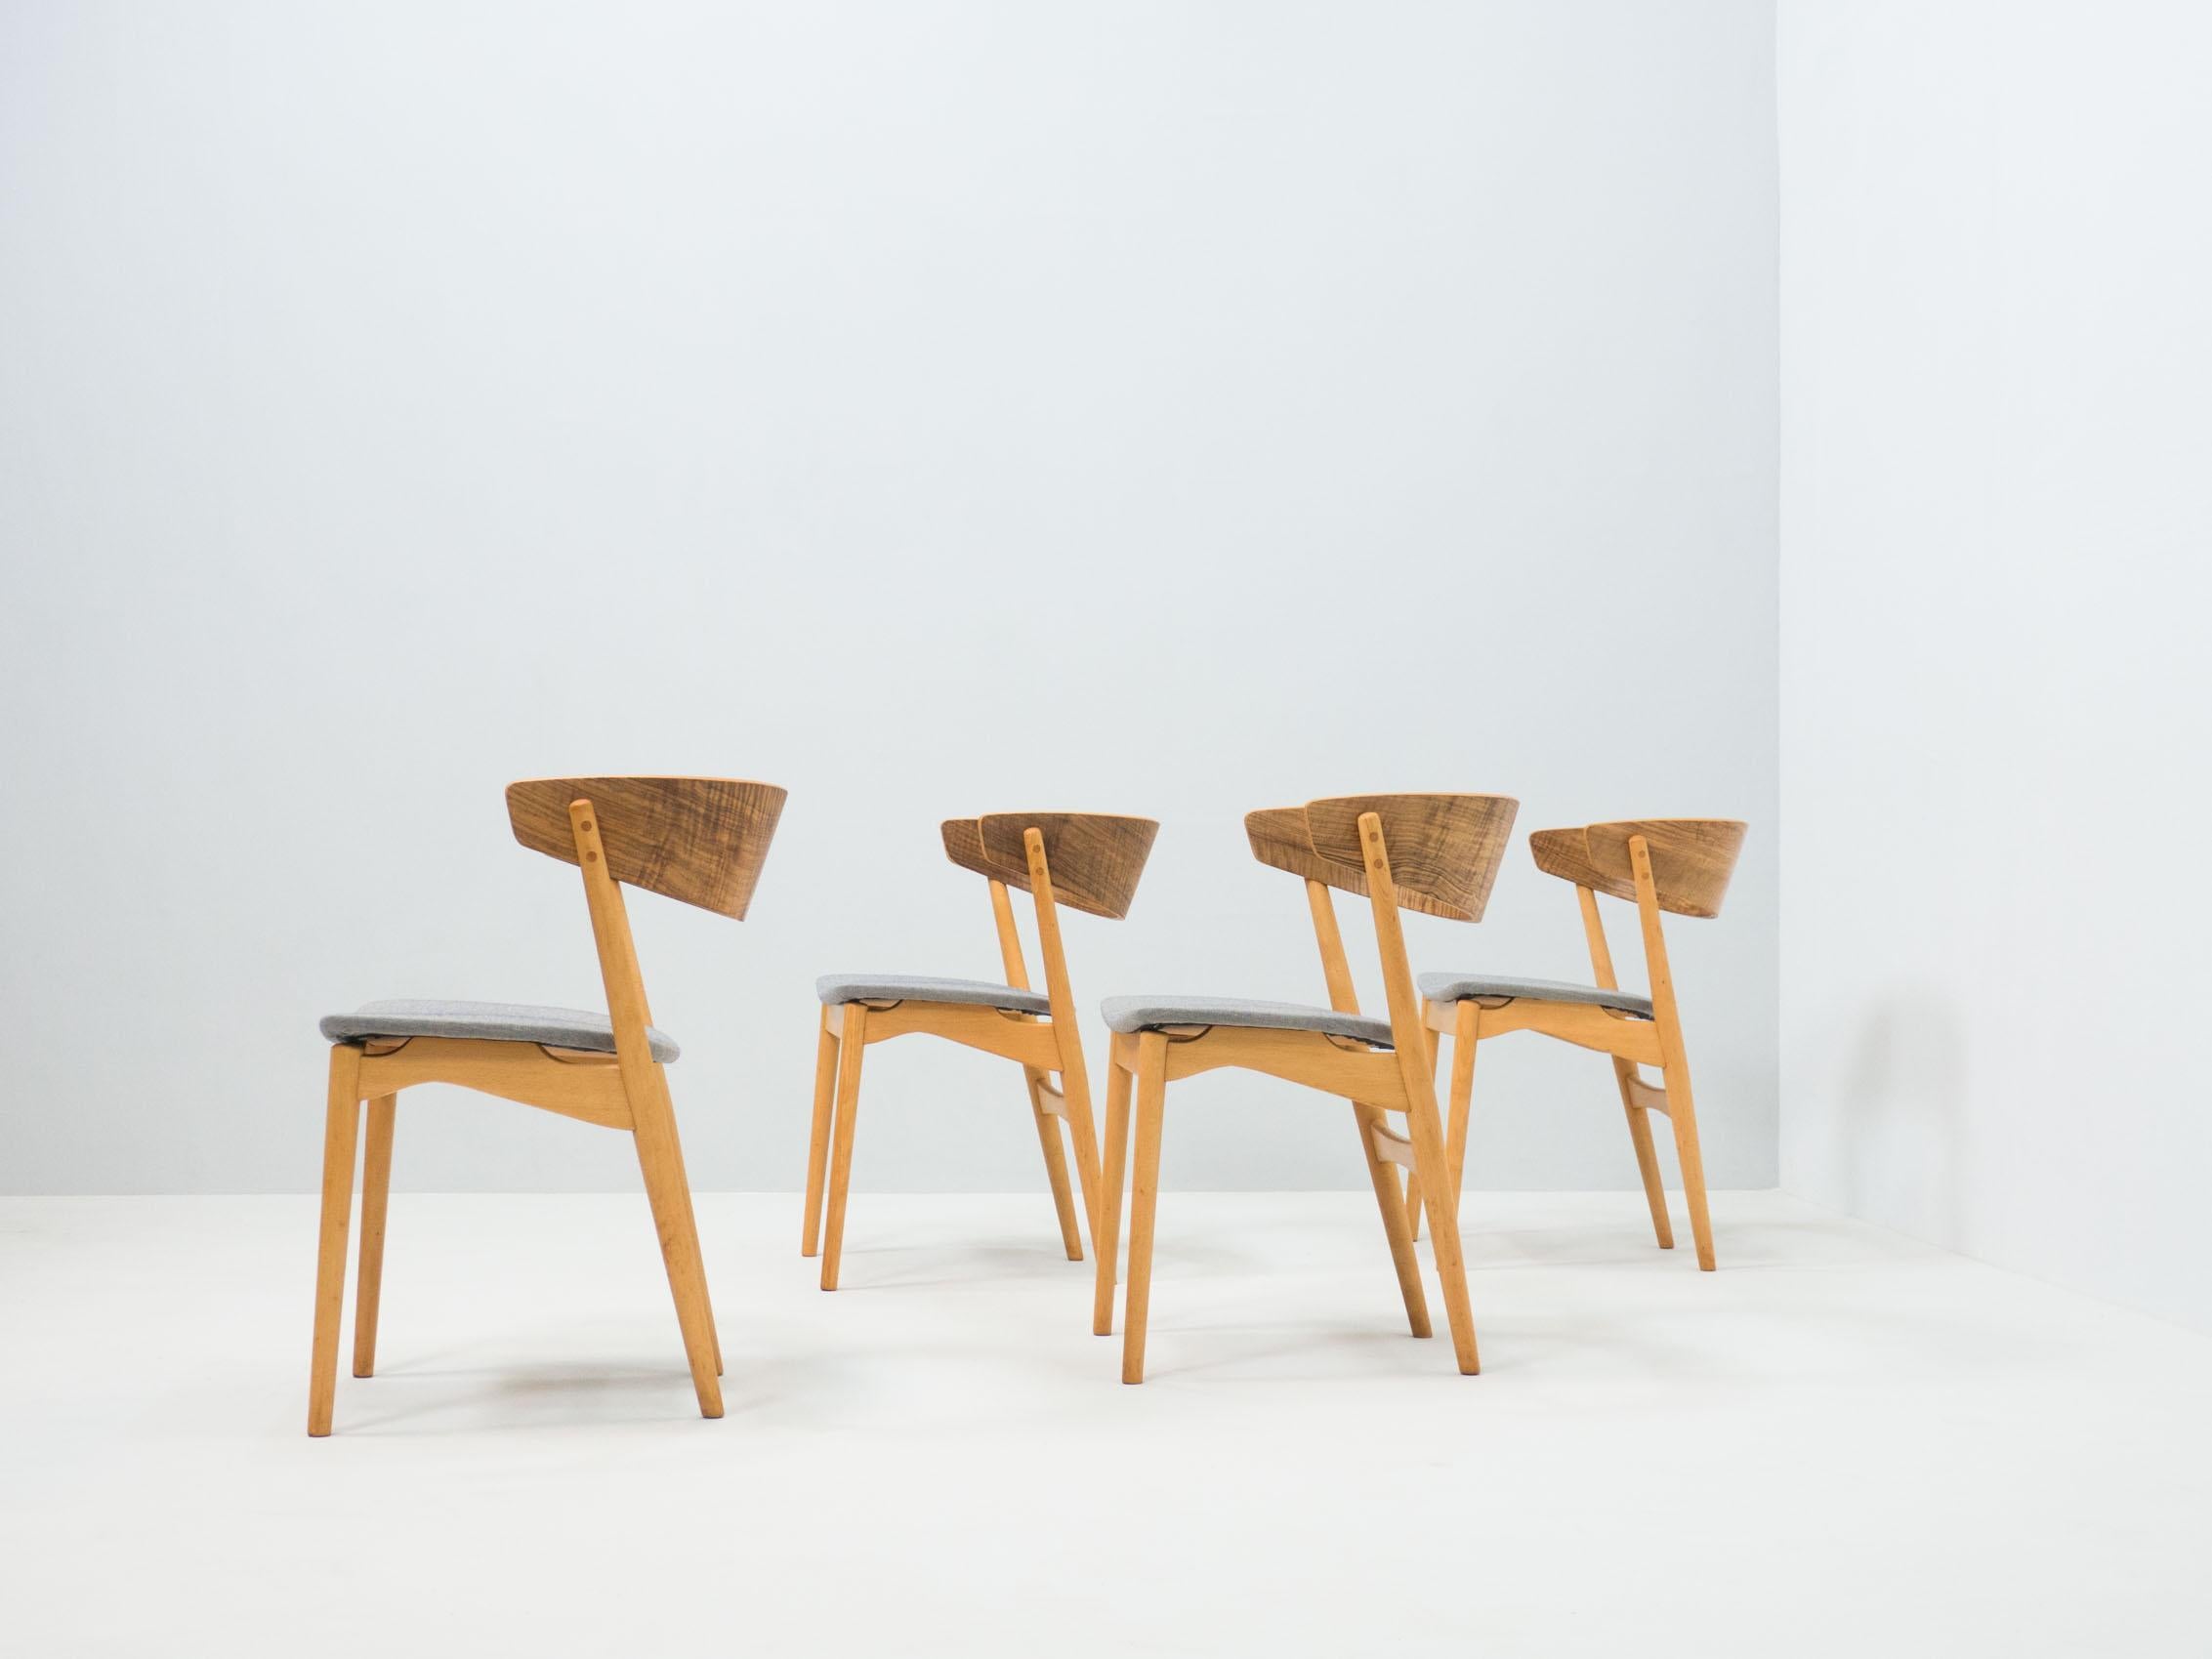 Set of four dining chairs designed by Helge Sibast, produced by Sibast Møbler, Denmark.

The chairs with model name ‘no. 7’ are made of a beech wood frame with walnut wood back rests.

All of the woodwork has been refinished. The seatings are